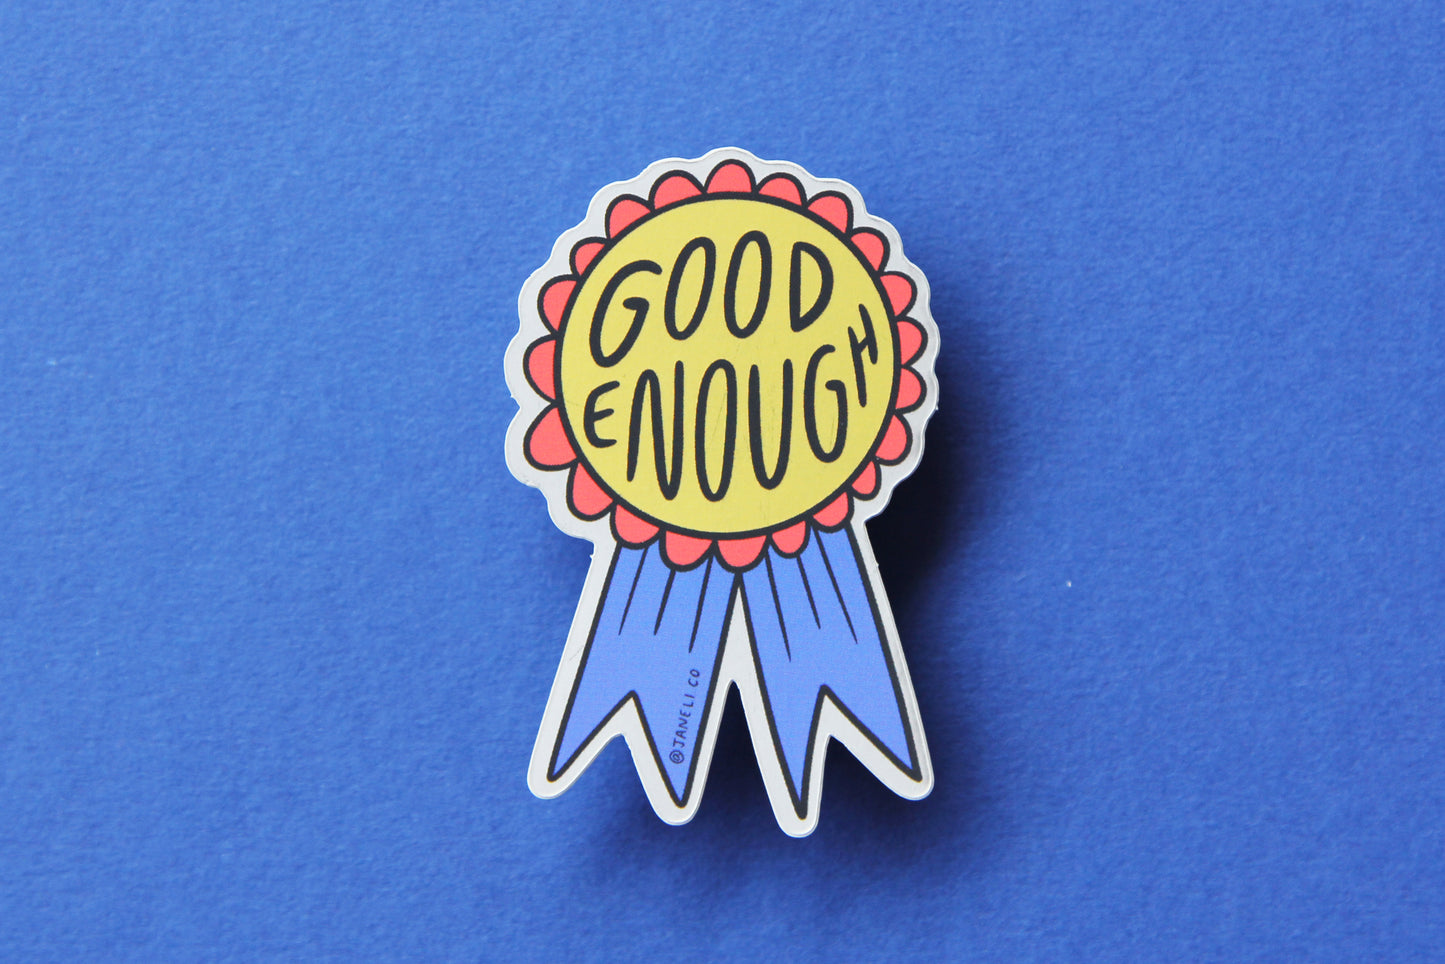 A JaneLi.Co sticker of a red and blue award ribbon that says "Good Enough" over a blue background.